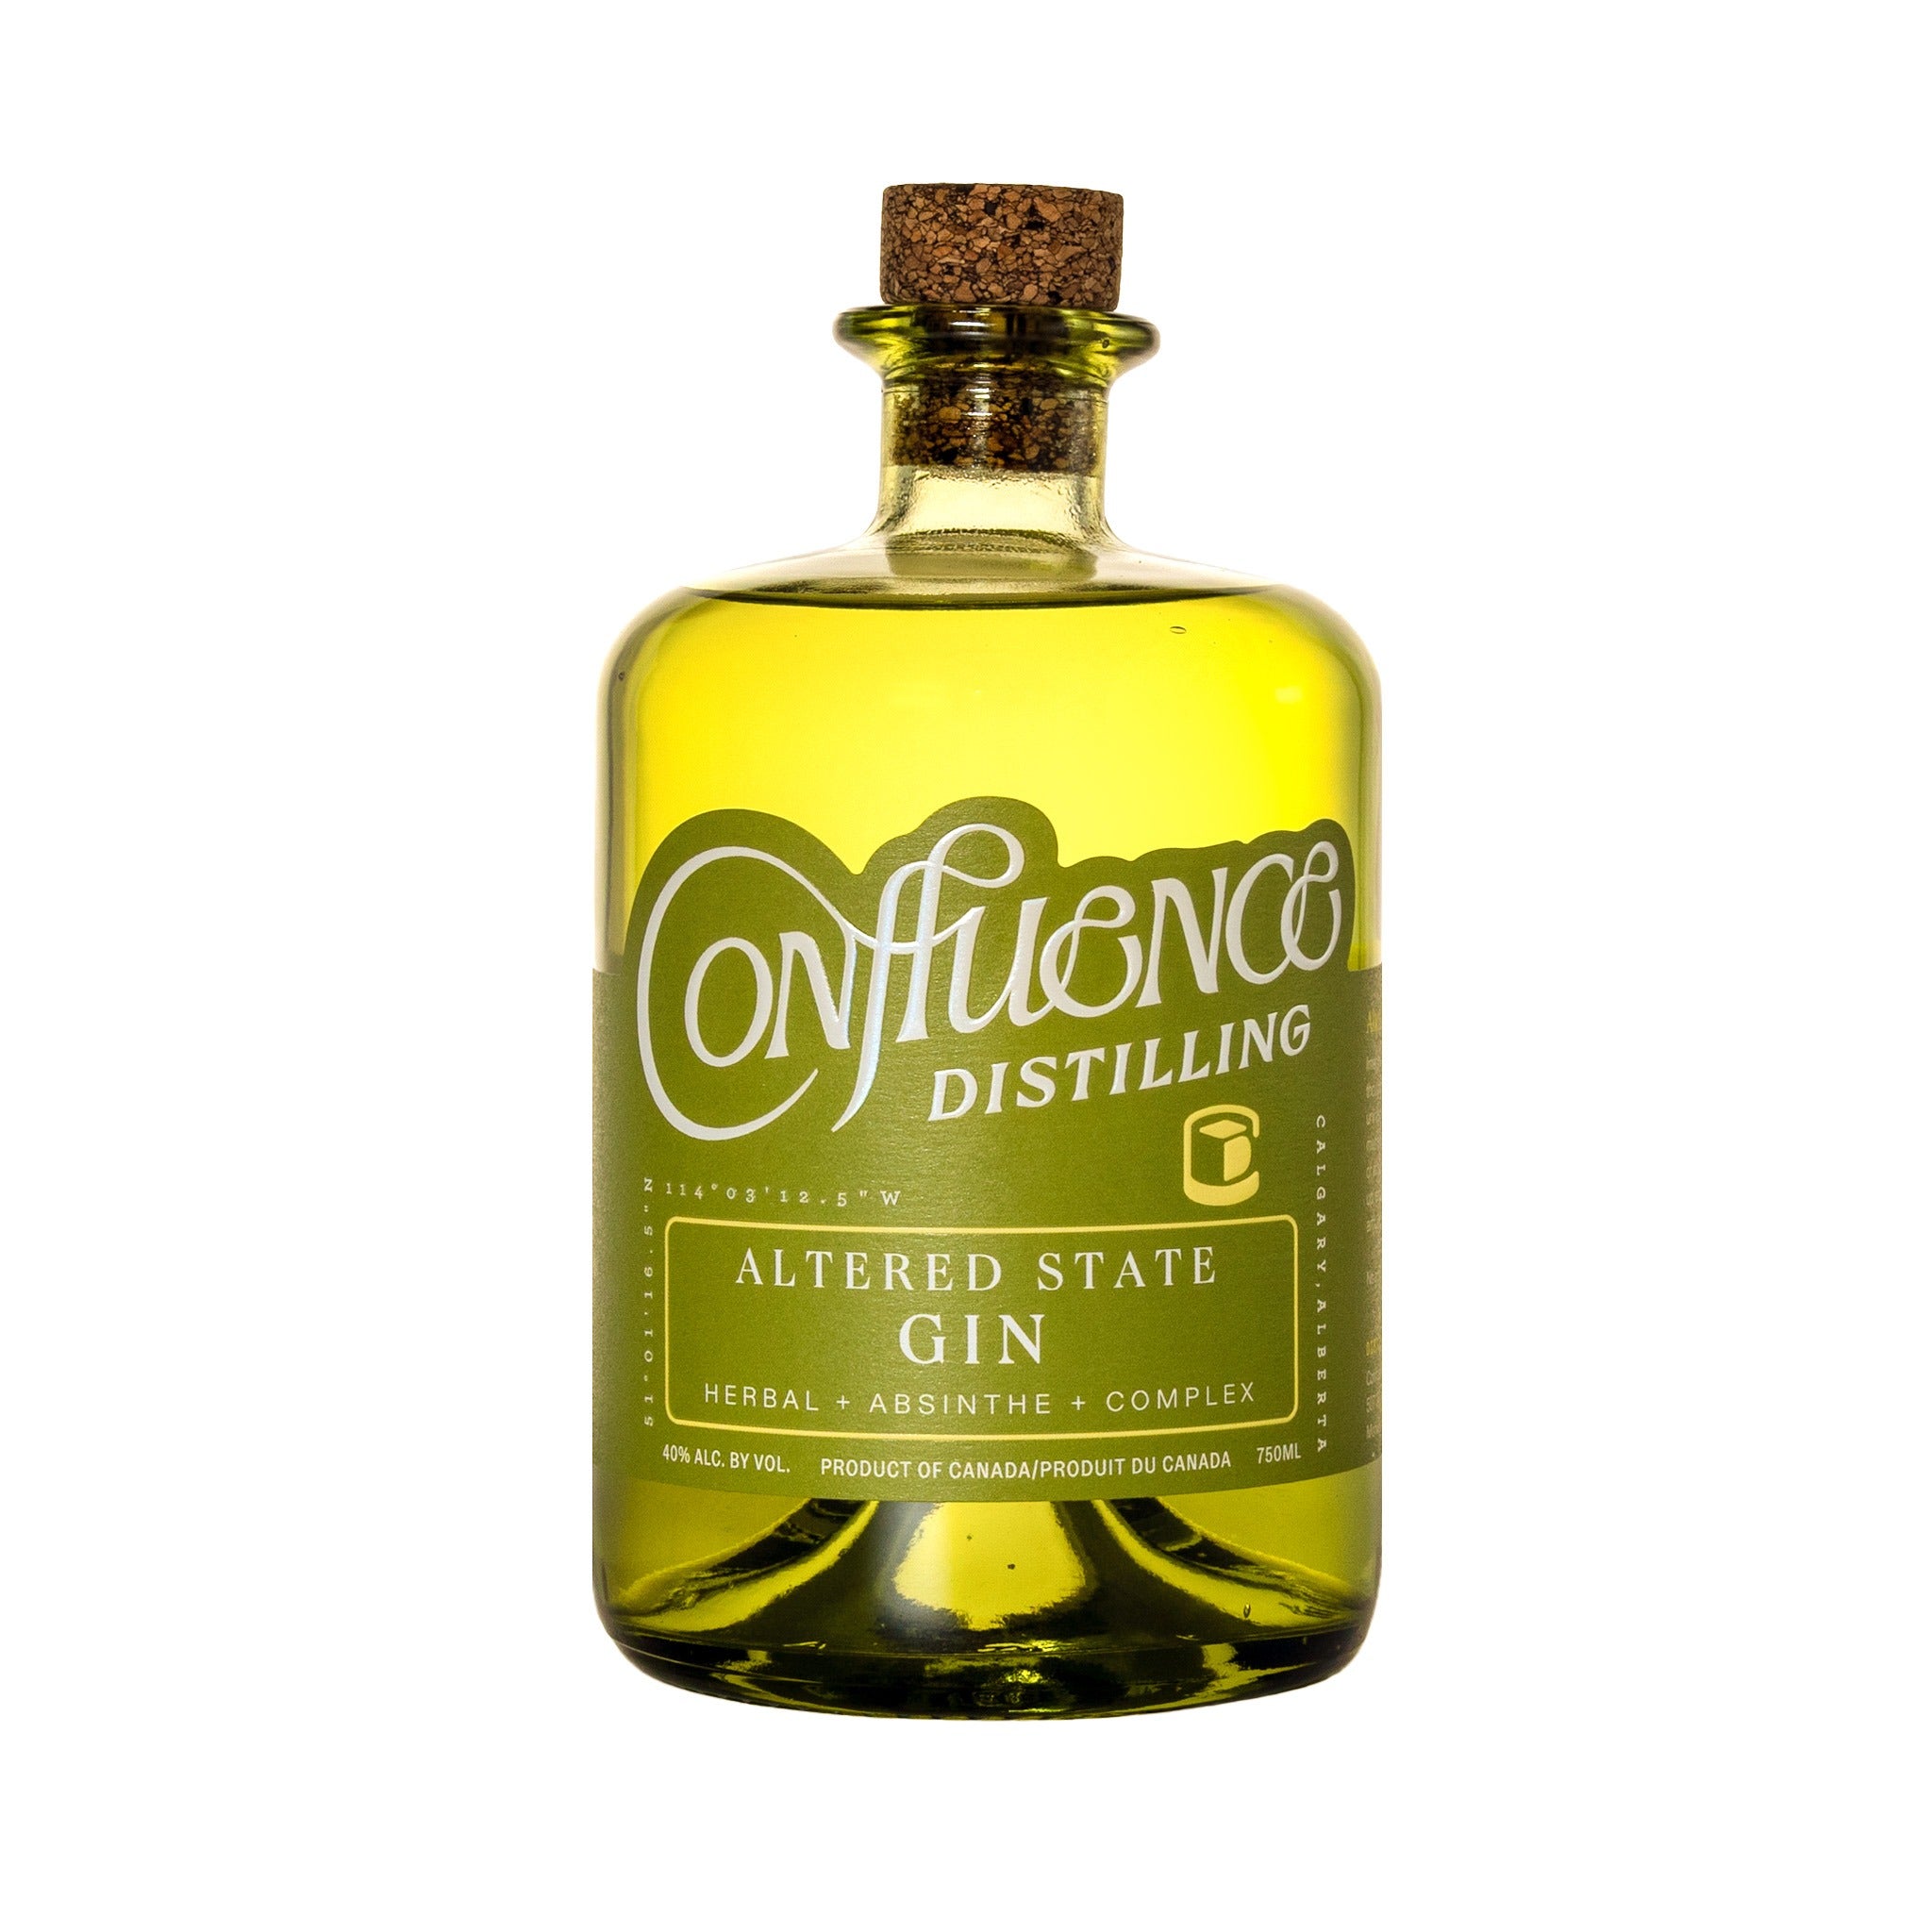 CONFLUENCE ALTERED STATE GIN 750ML